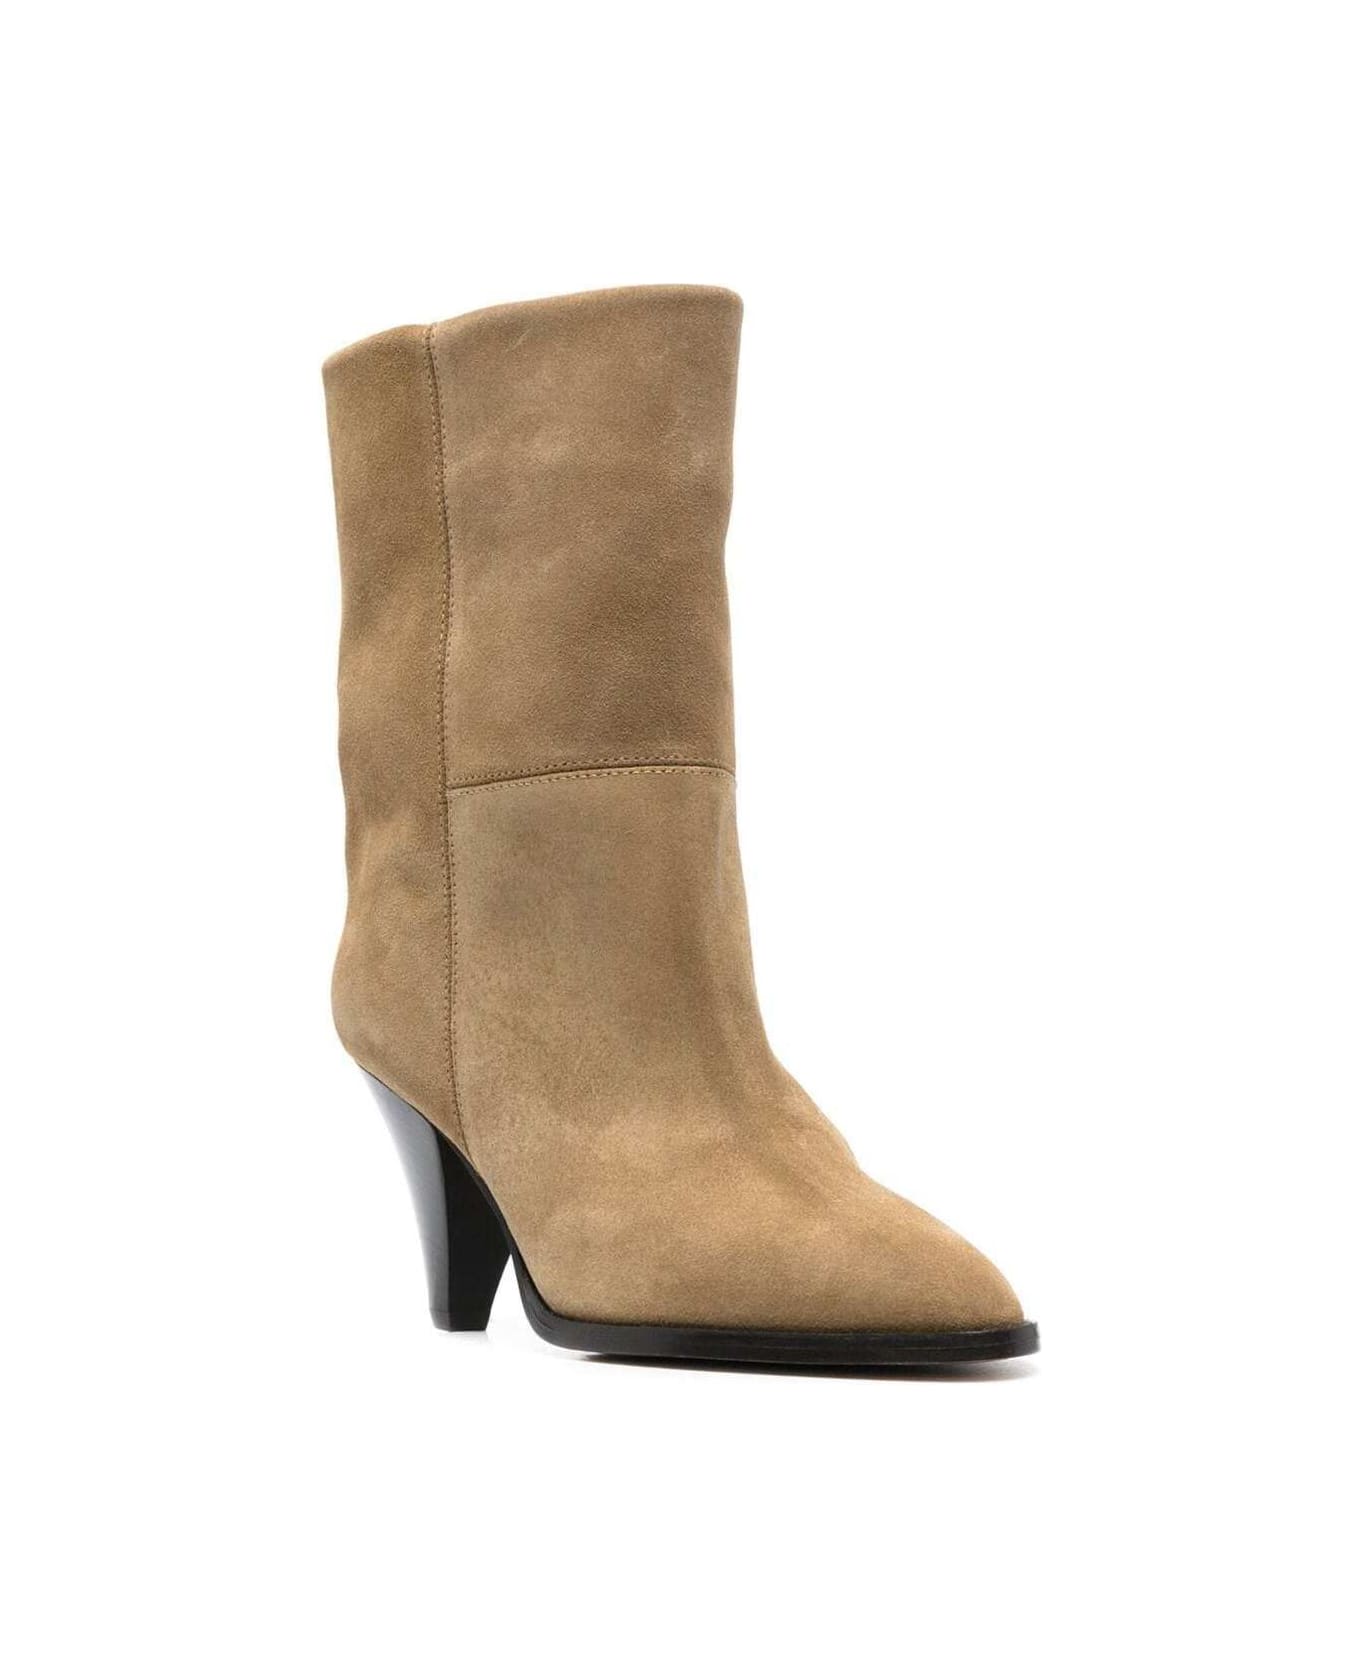 Isabel Marant Beige Suede Boots In Cow Leather Woman - Beige